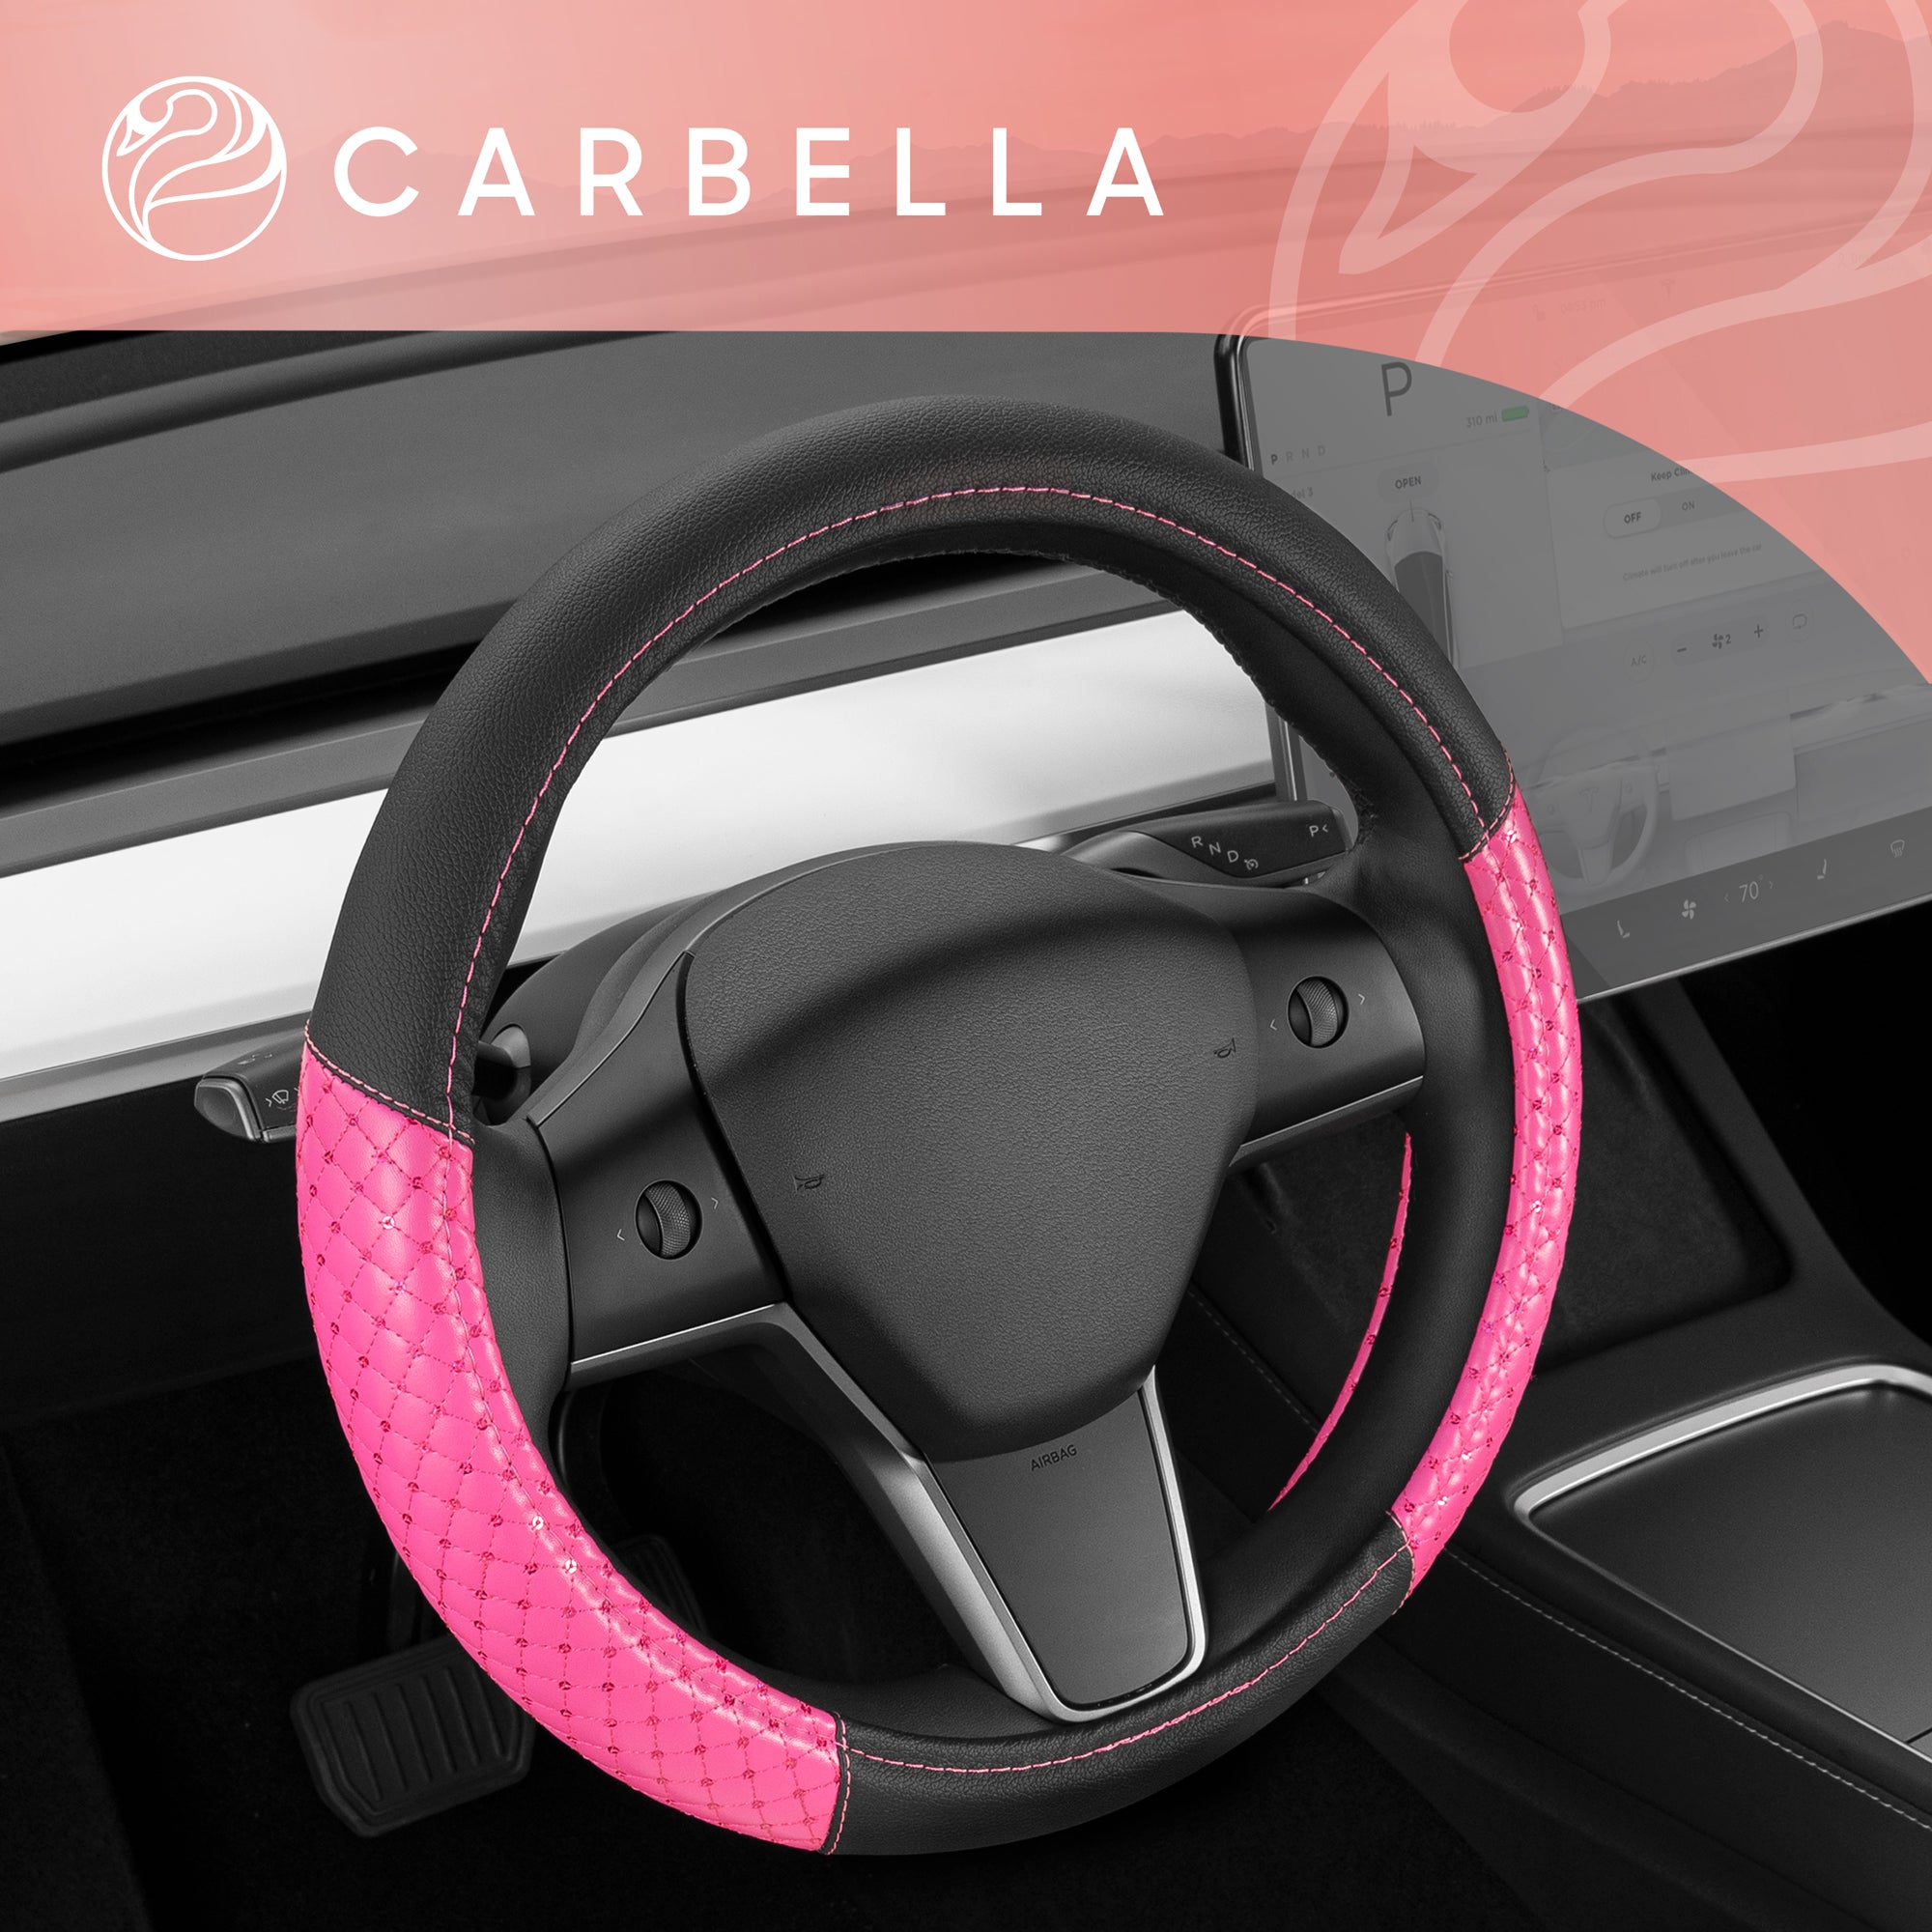 Carbella Pink Sequin Bling Steering Wheel Cover, Standard 15 Inch Size Fits Most Vehicles, Cute Faux Leather Car Steering Cover with Diamond Rhinestone Glitter Like Detail, Car Accessories for Women